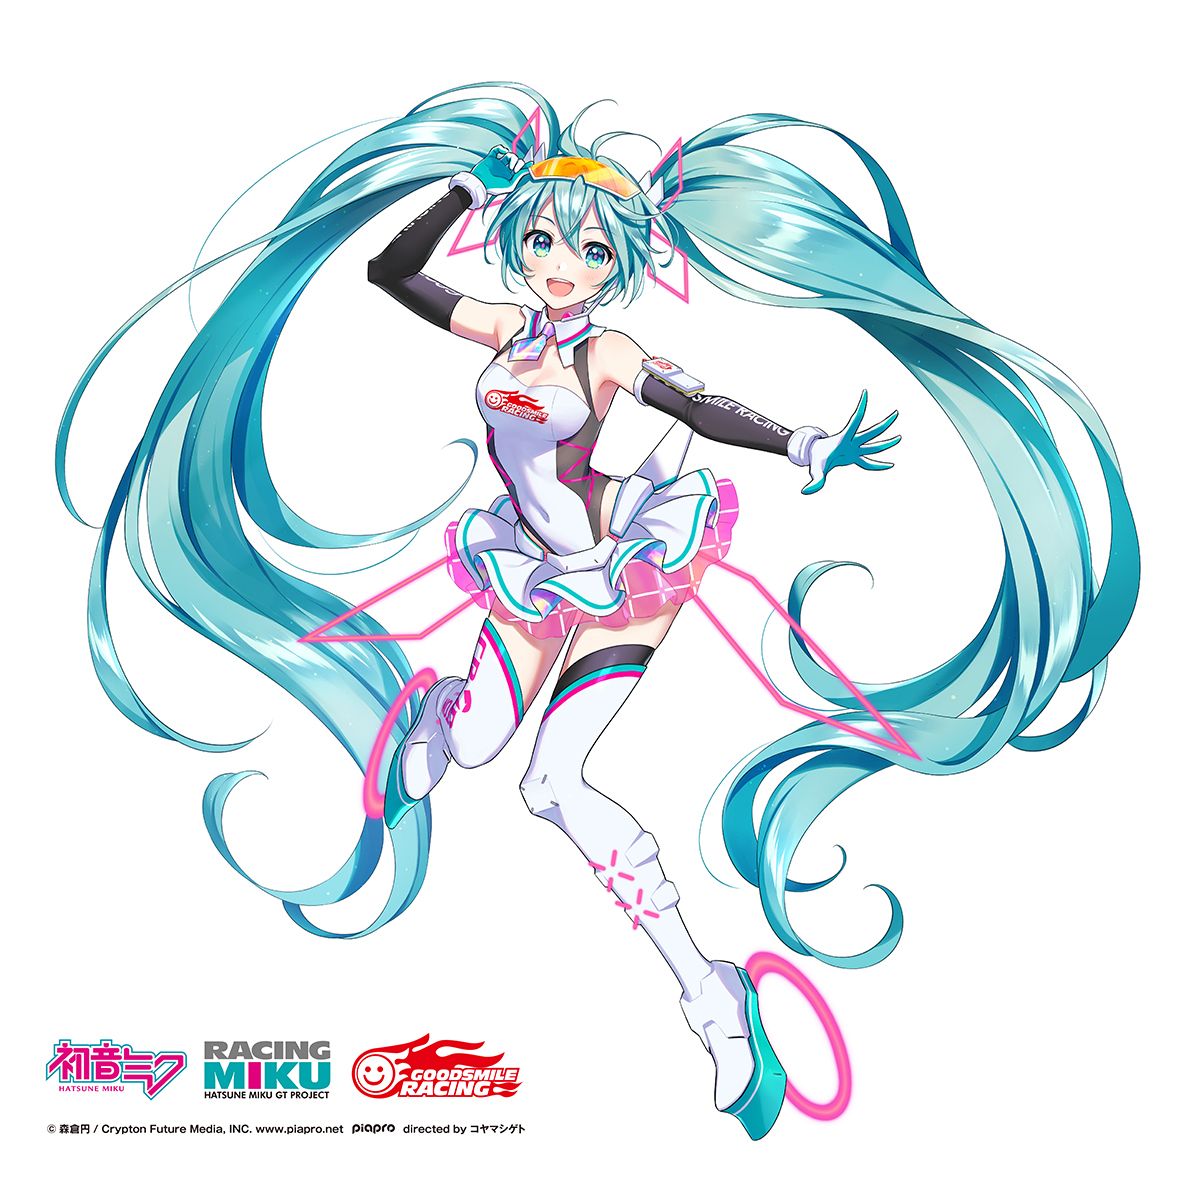 Goodsmile Racing Announces Racing Miku 2021 and Entry for the 2021 Super GT season